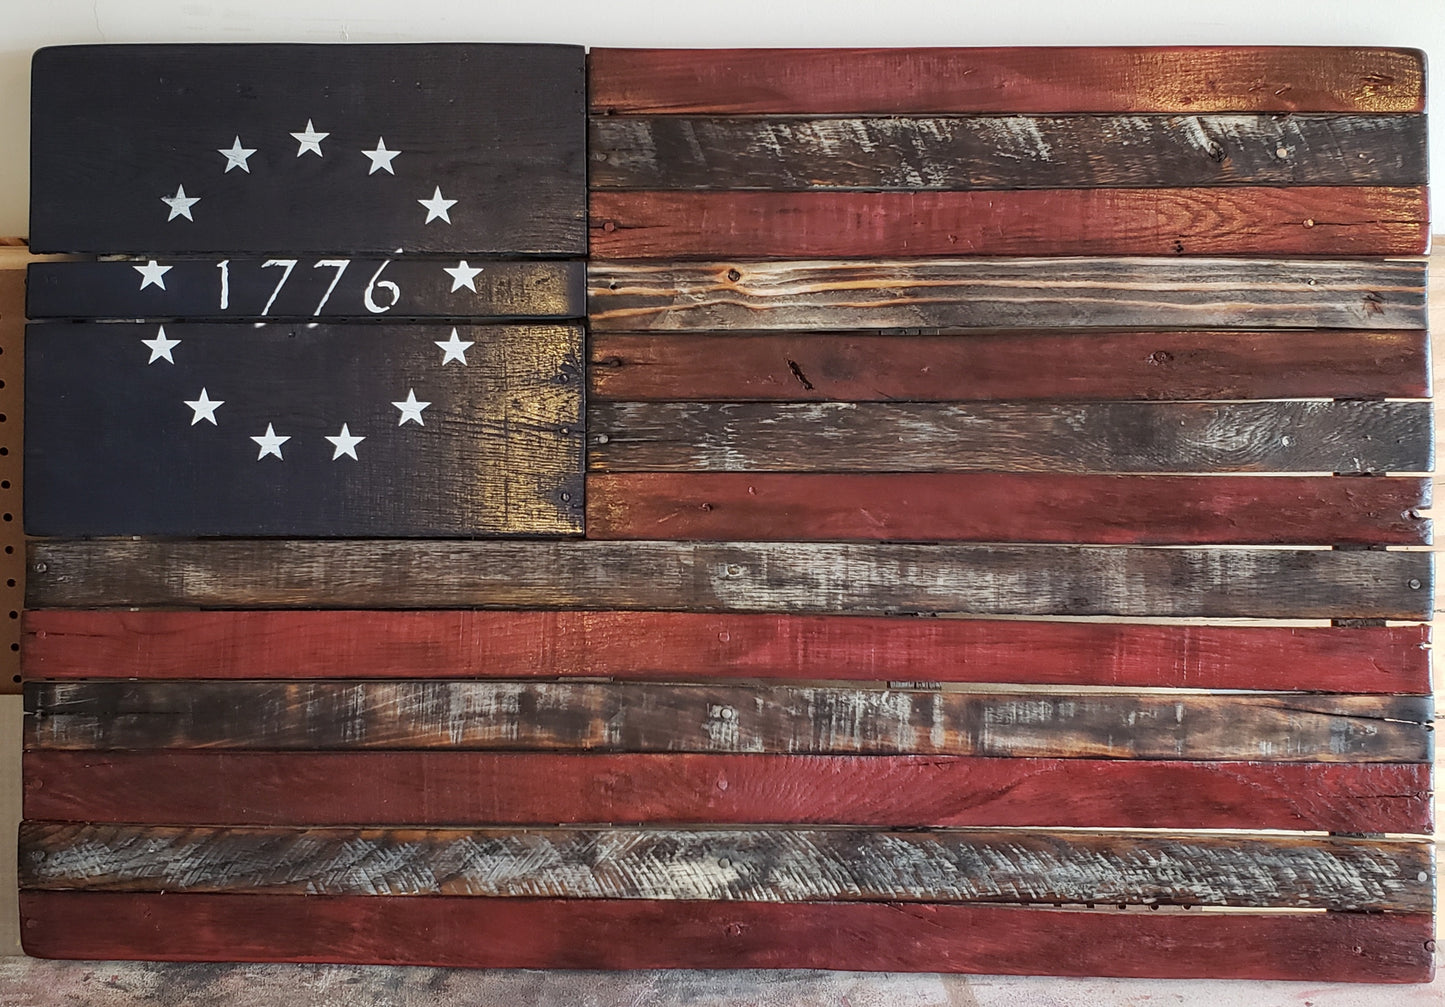 Large 5'x3' 1776 Wooden American Flag